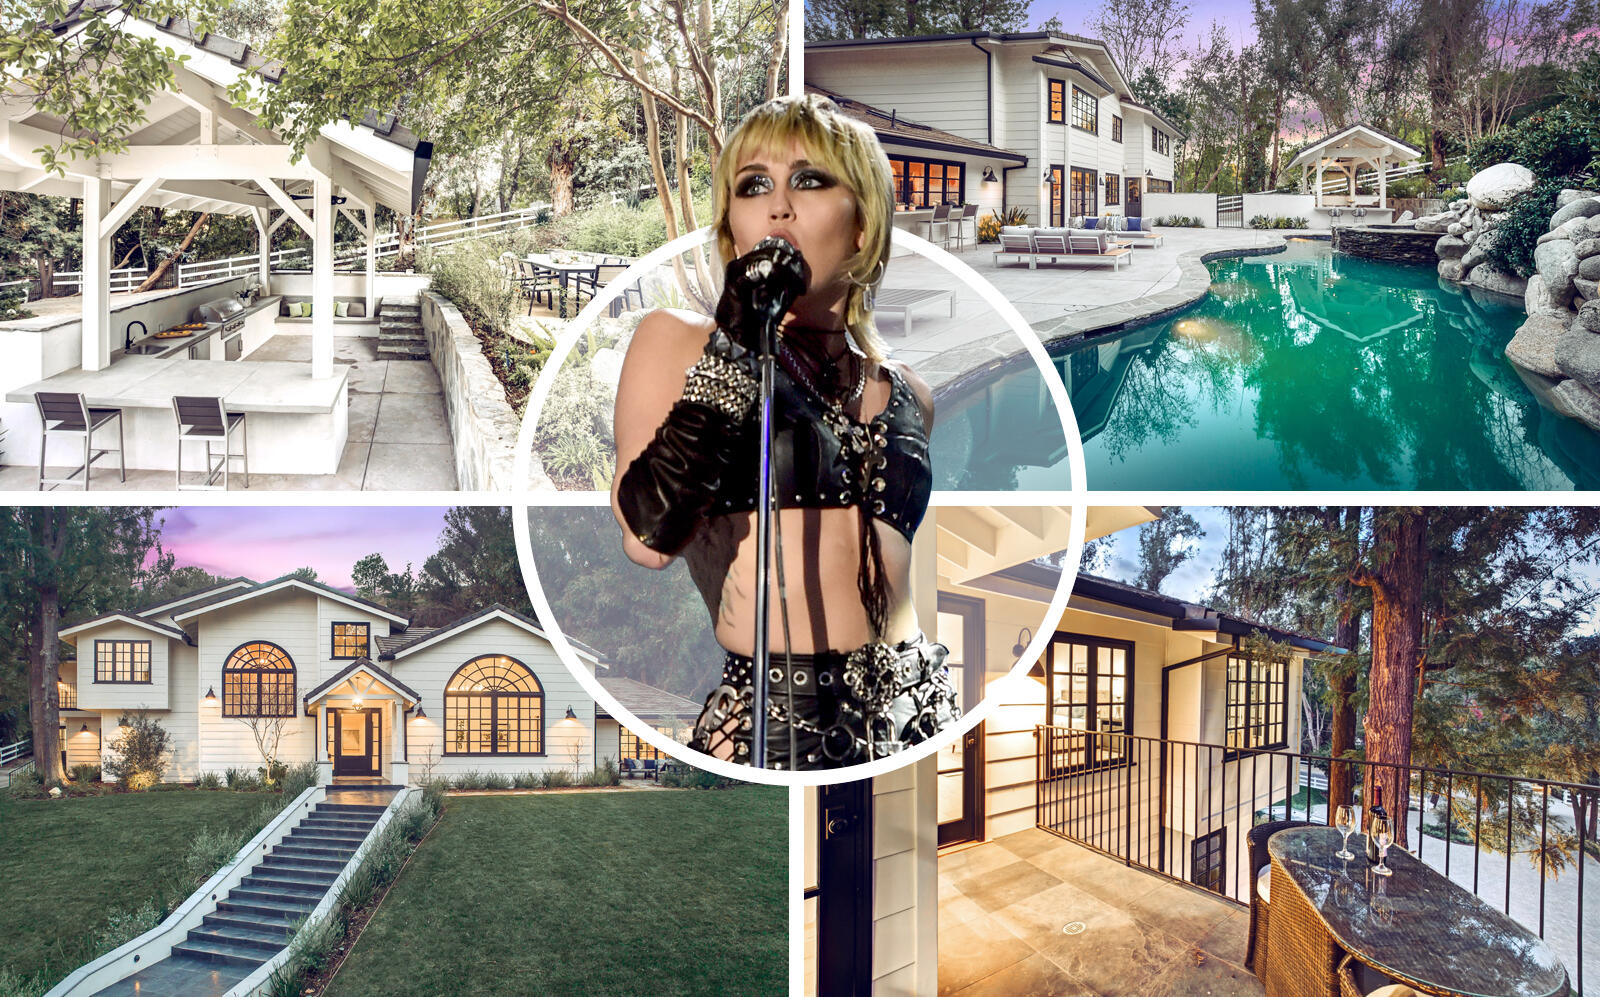 Miley Cyrus and the Hidden Hills property (Getty, Dana and Jeff Luxury Groups)